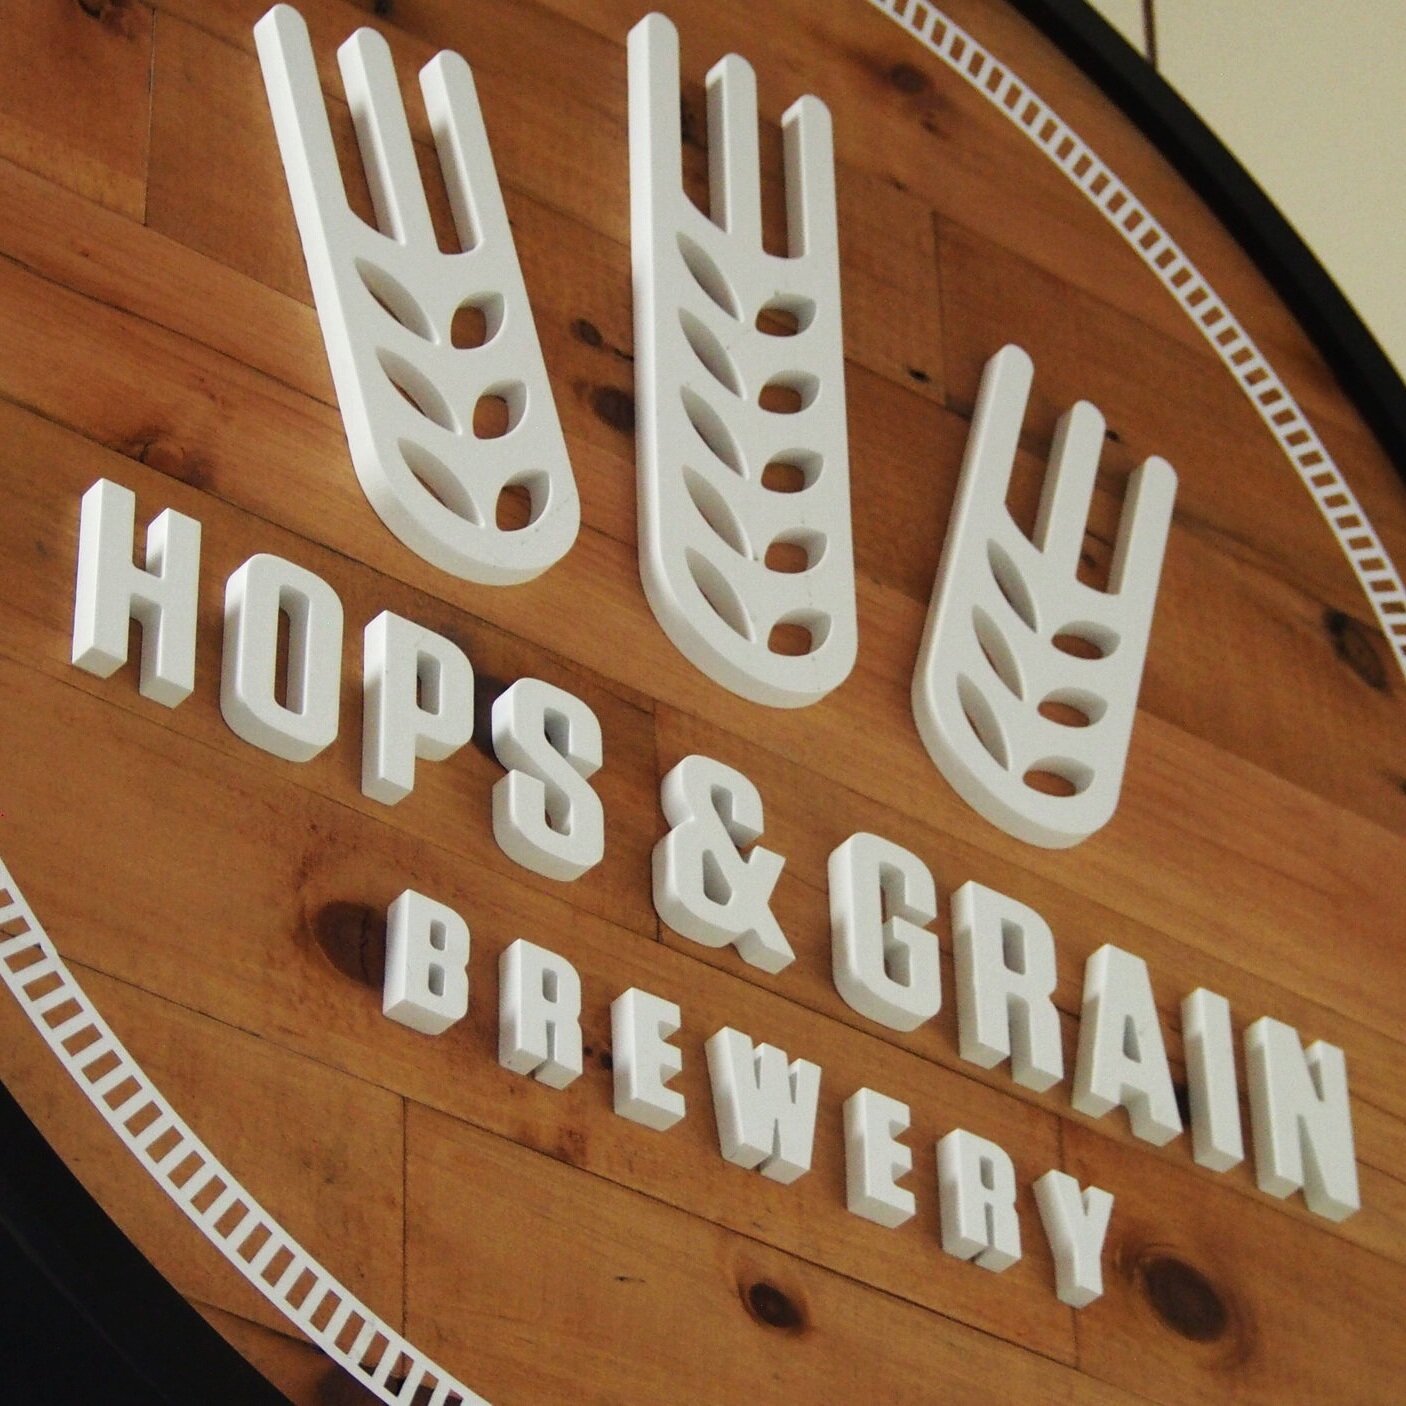 Hops and Grain Brewery